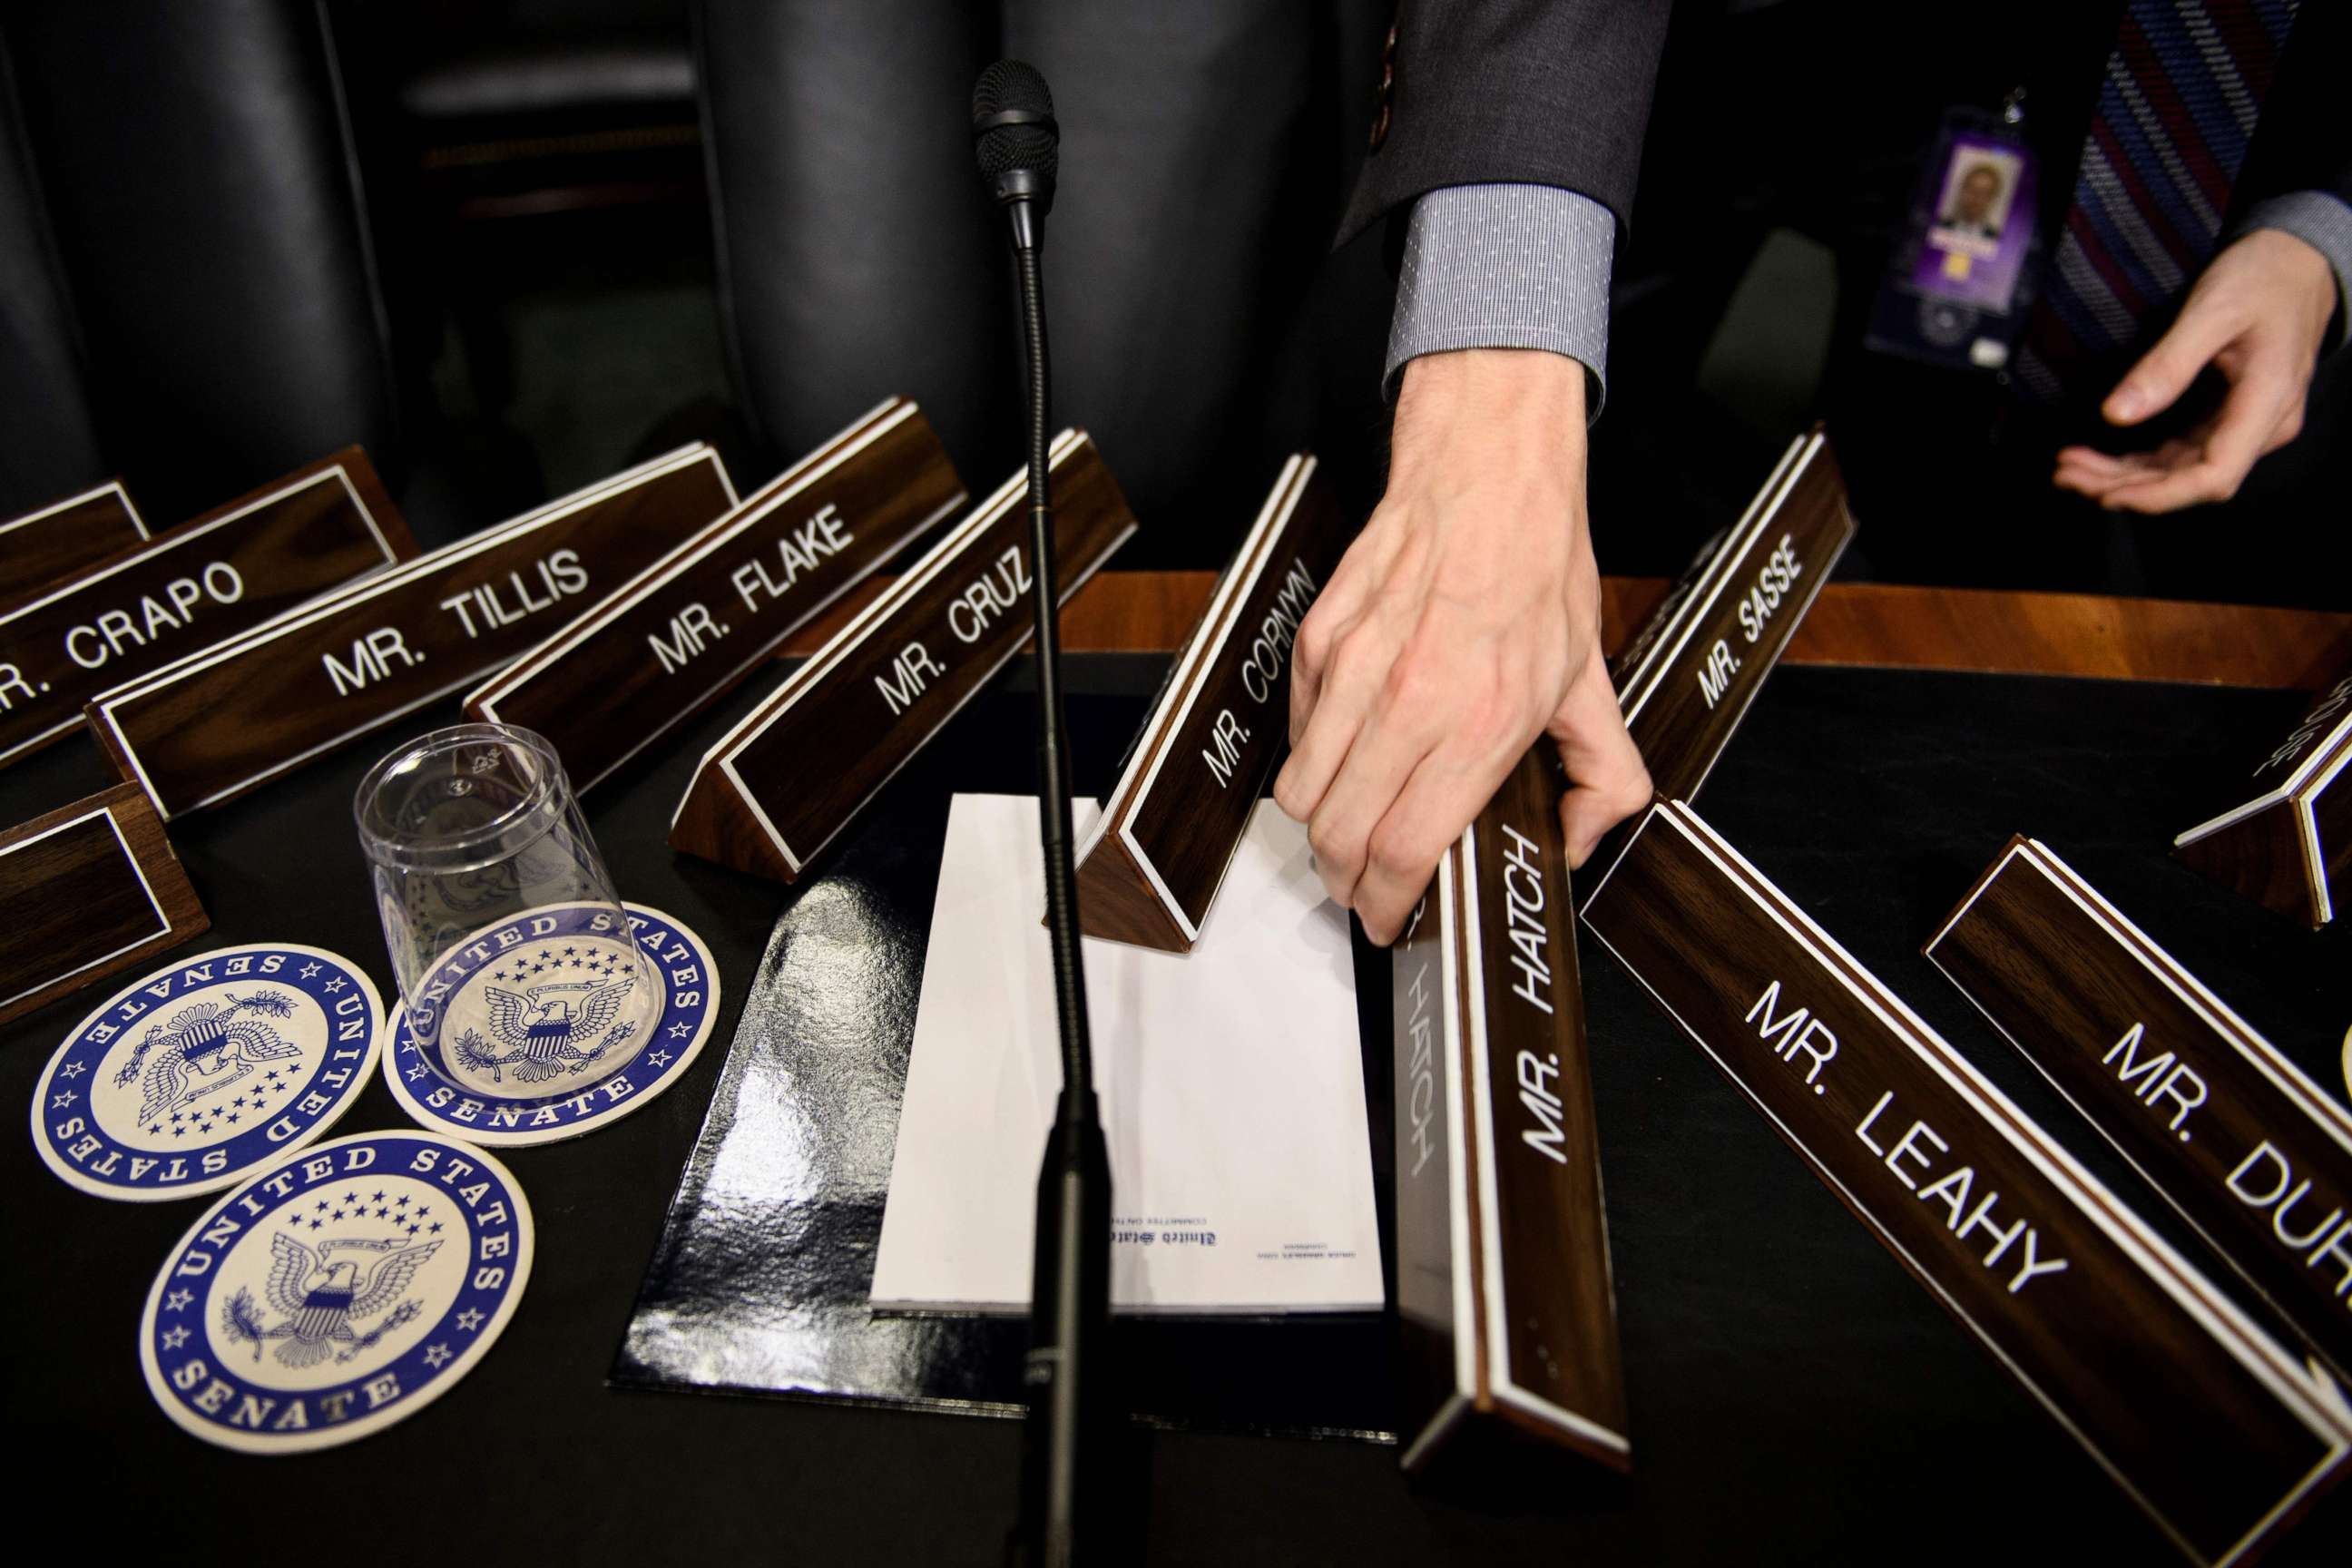 PHOTO: A staff member places name plates as the Senate Judiciary Committee's room  on Capitol Hill, Sept. 26, 2018 in Washington, during preparations one day before the hearing with Blasey Ford and Supreme Court nominee Judge Brett Kavanaugh.